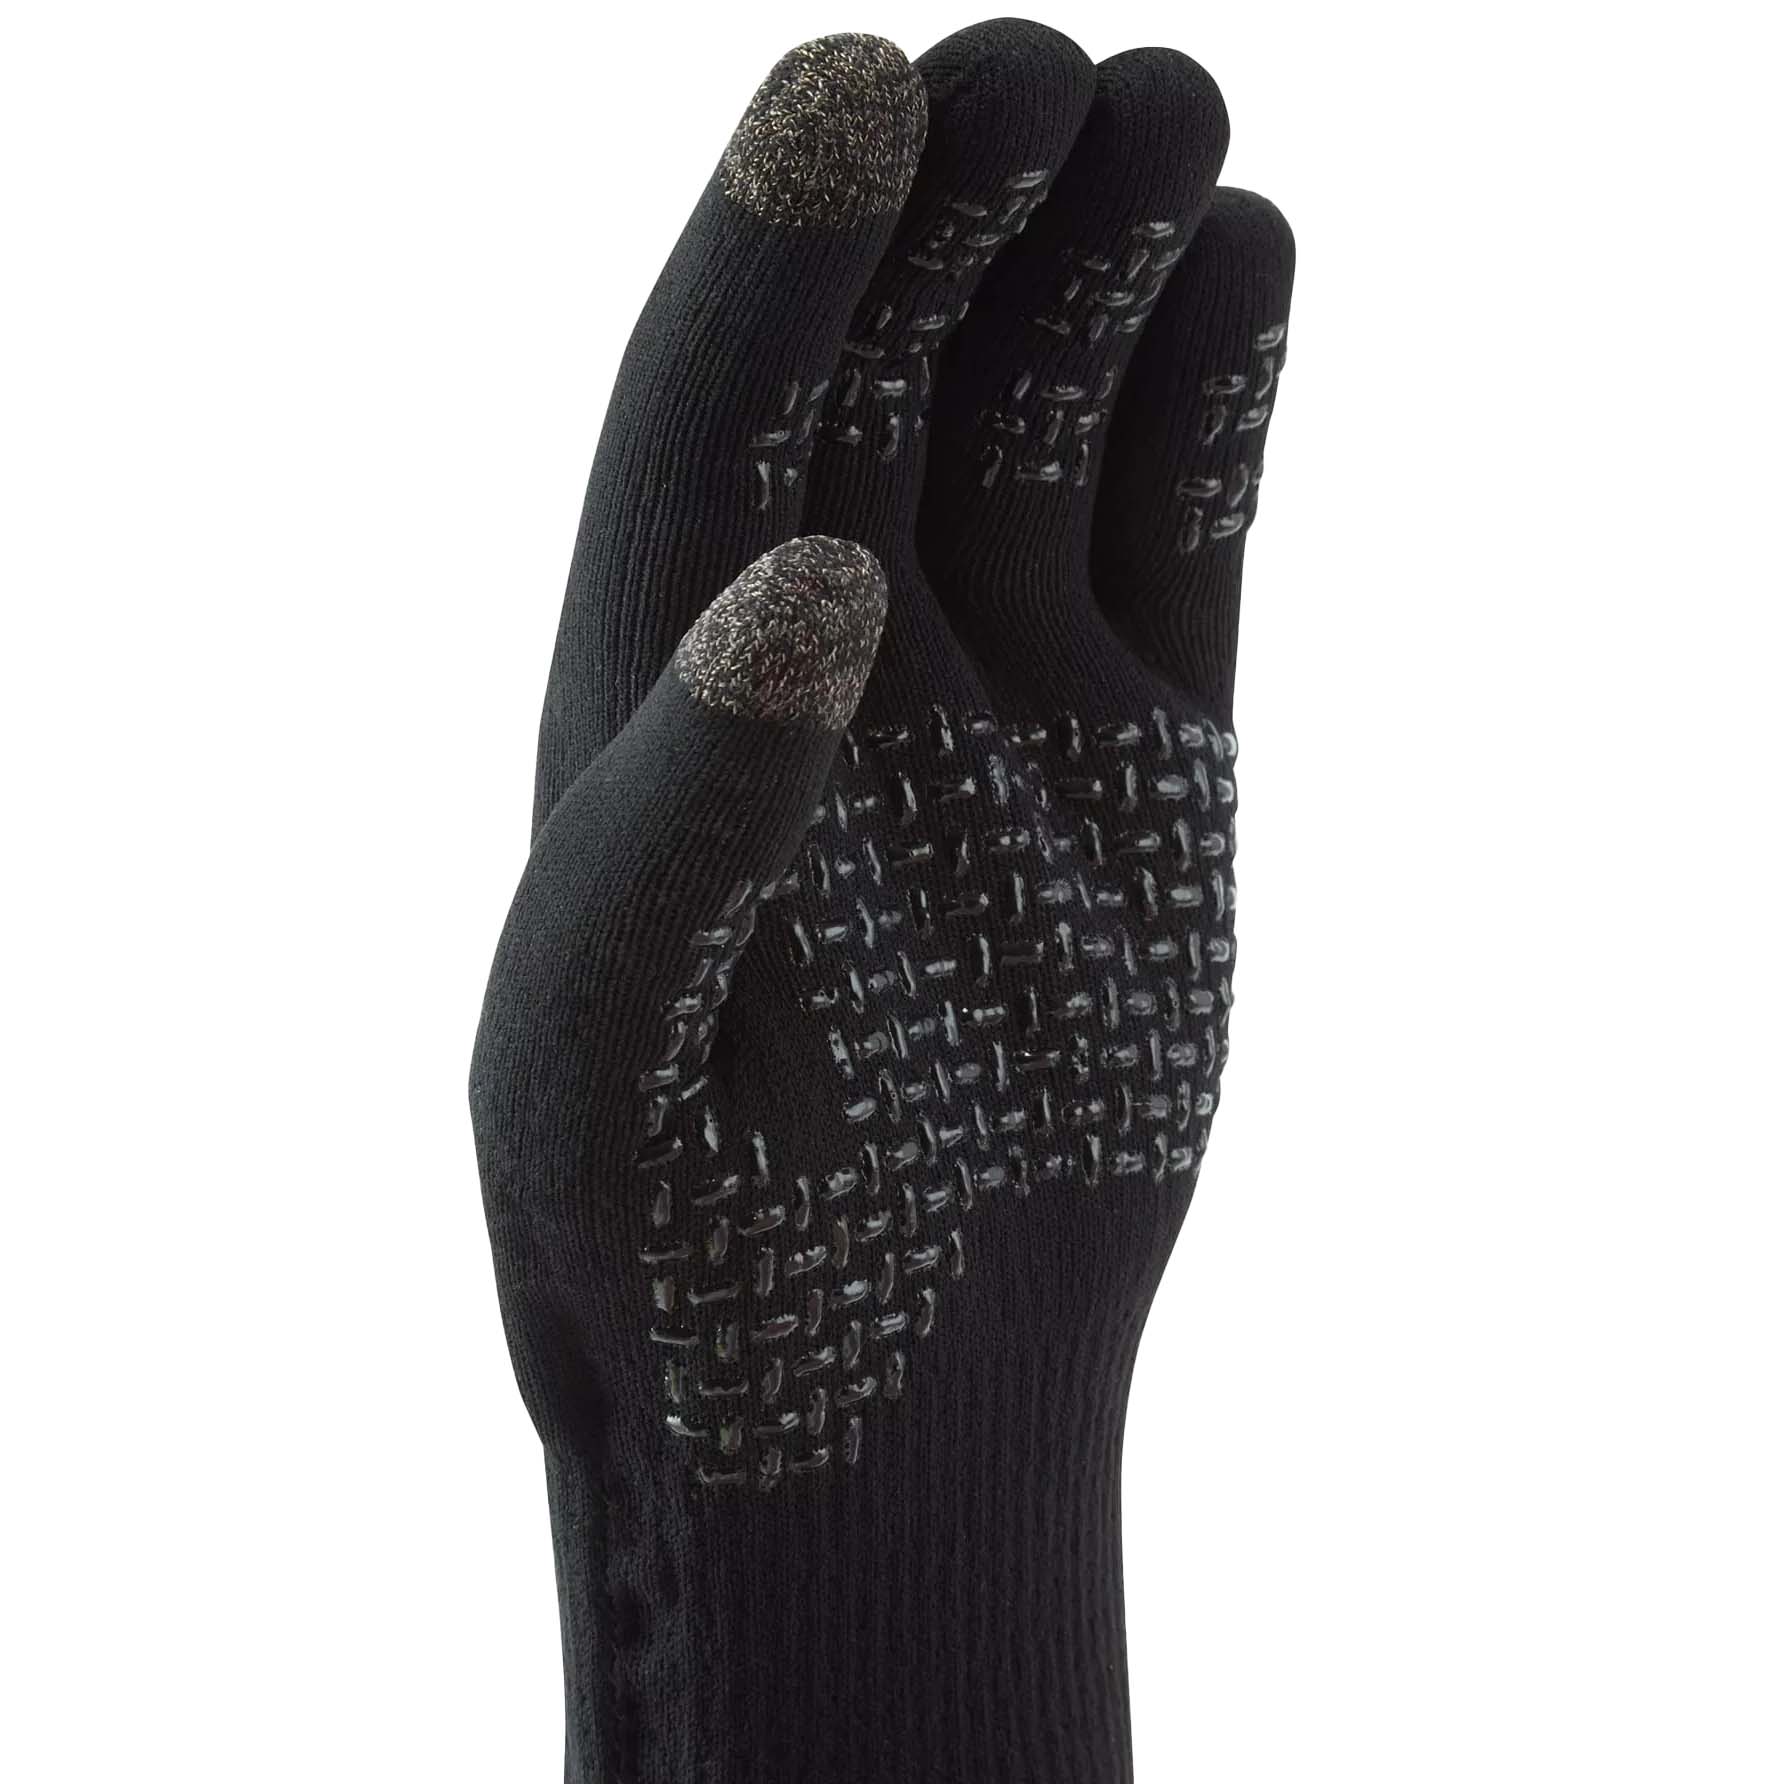 SealSkinz Anmer Waterproof All Weather Ultra Grip Knitted Glove